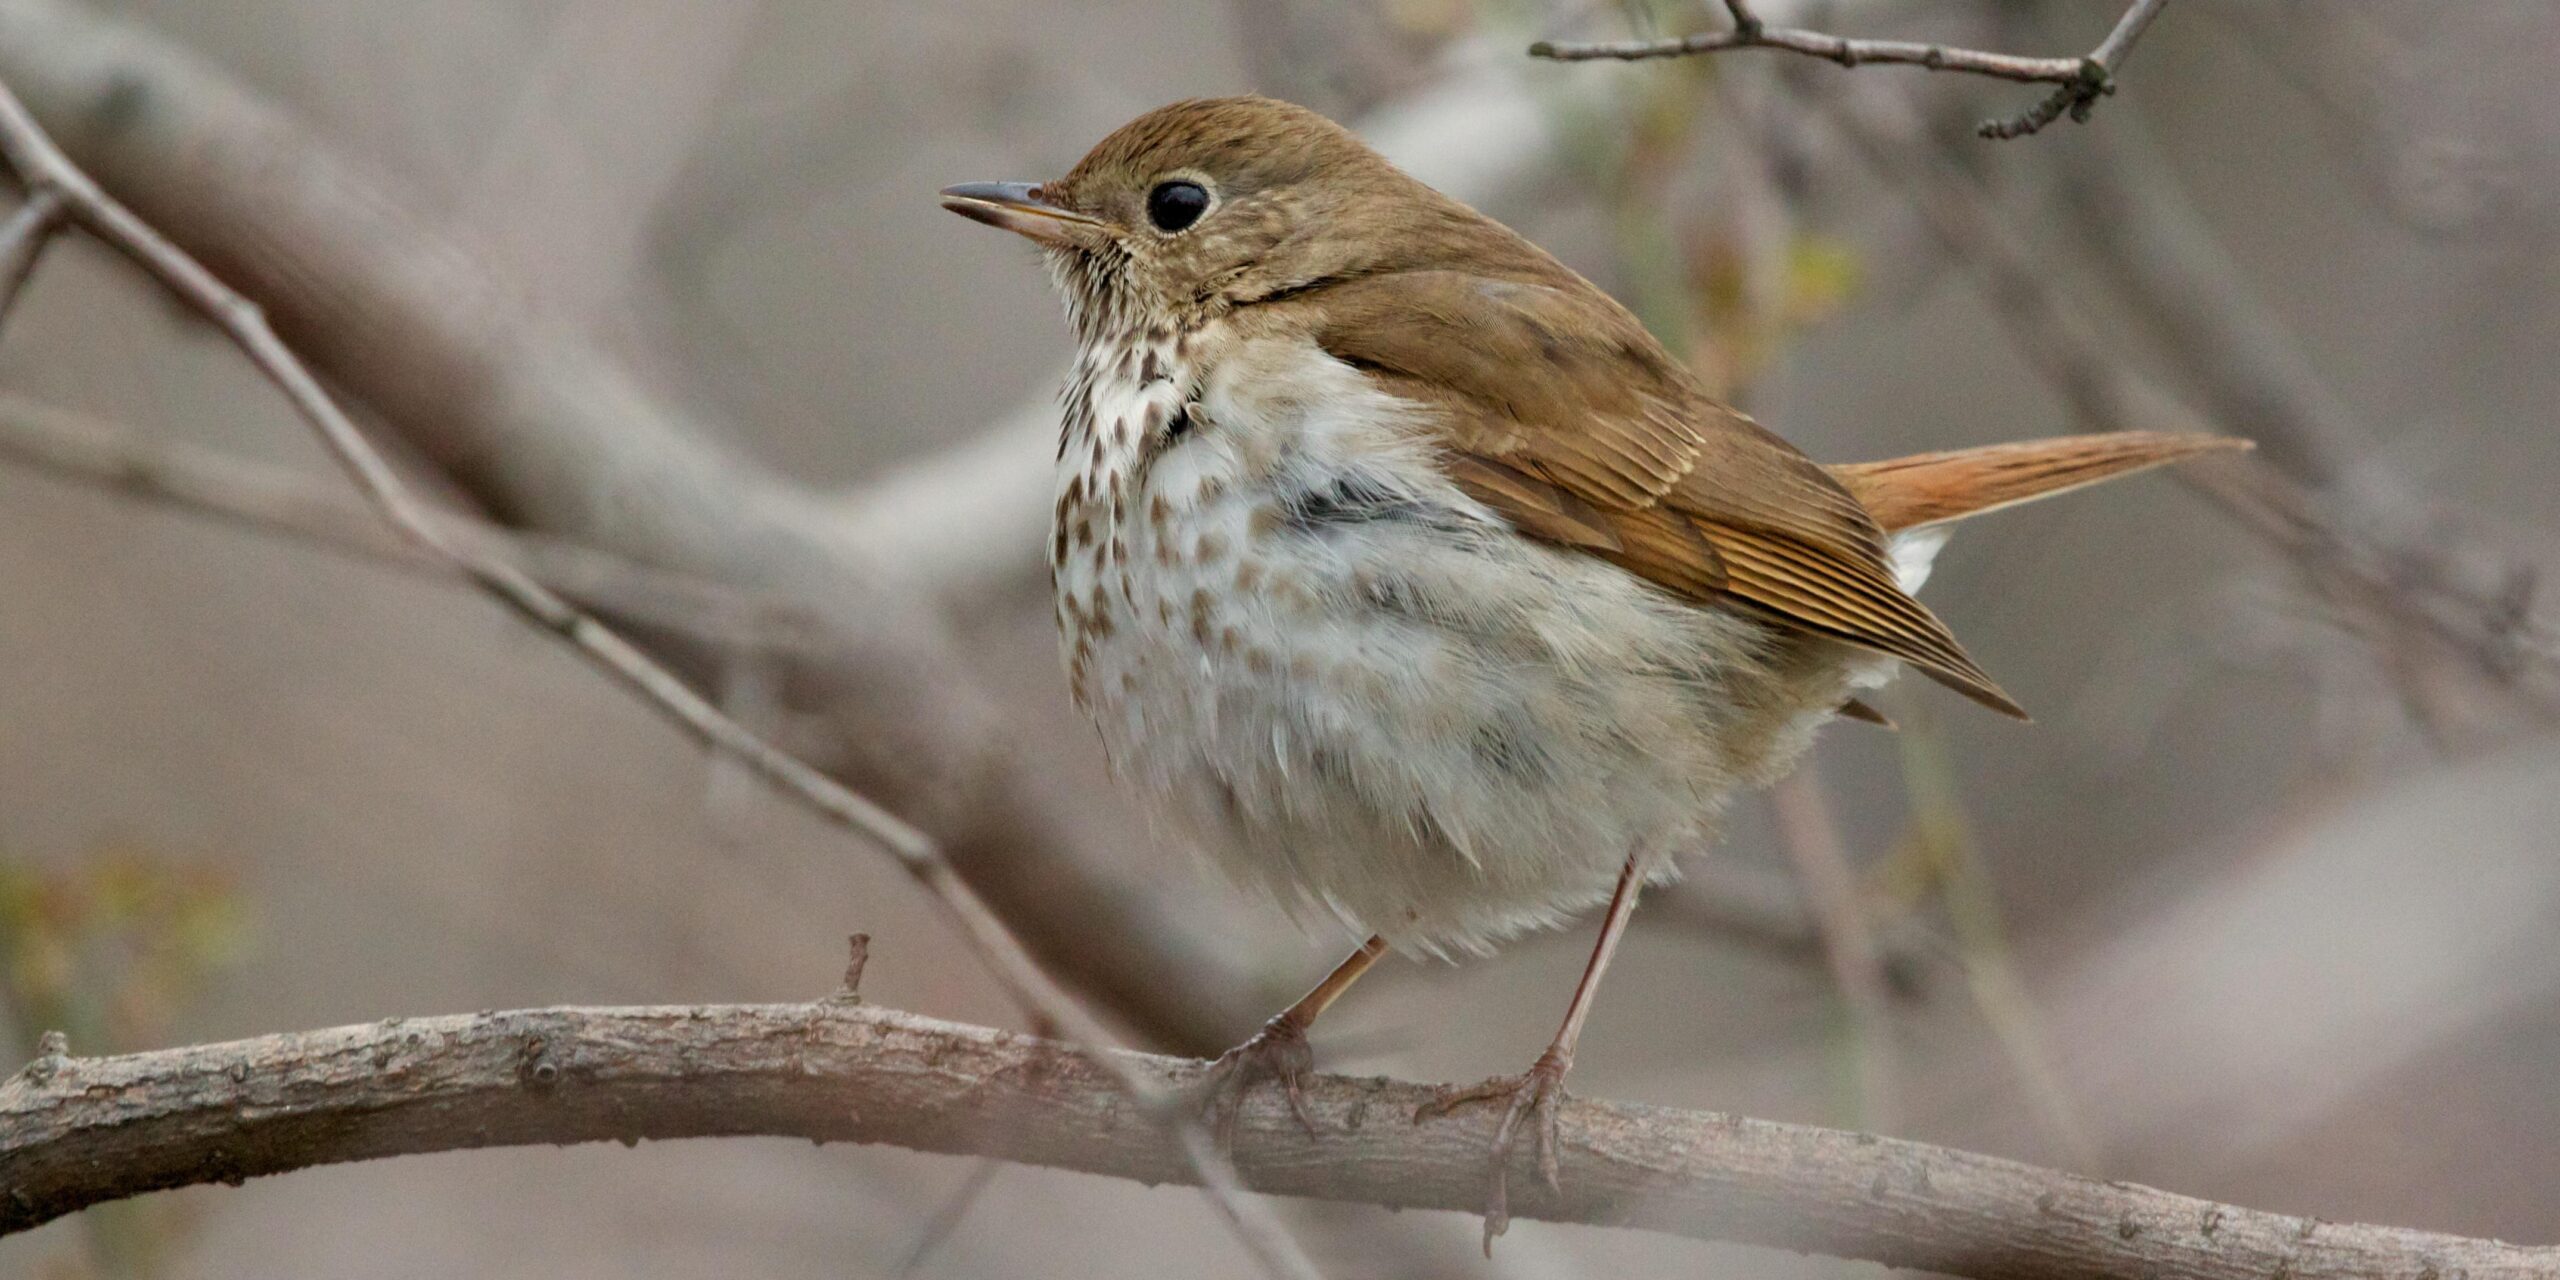 Hermit Thrush photos and wallpapers Collection of the